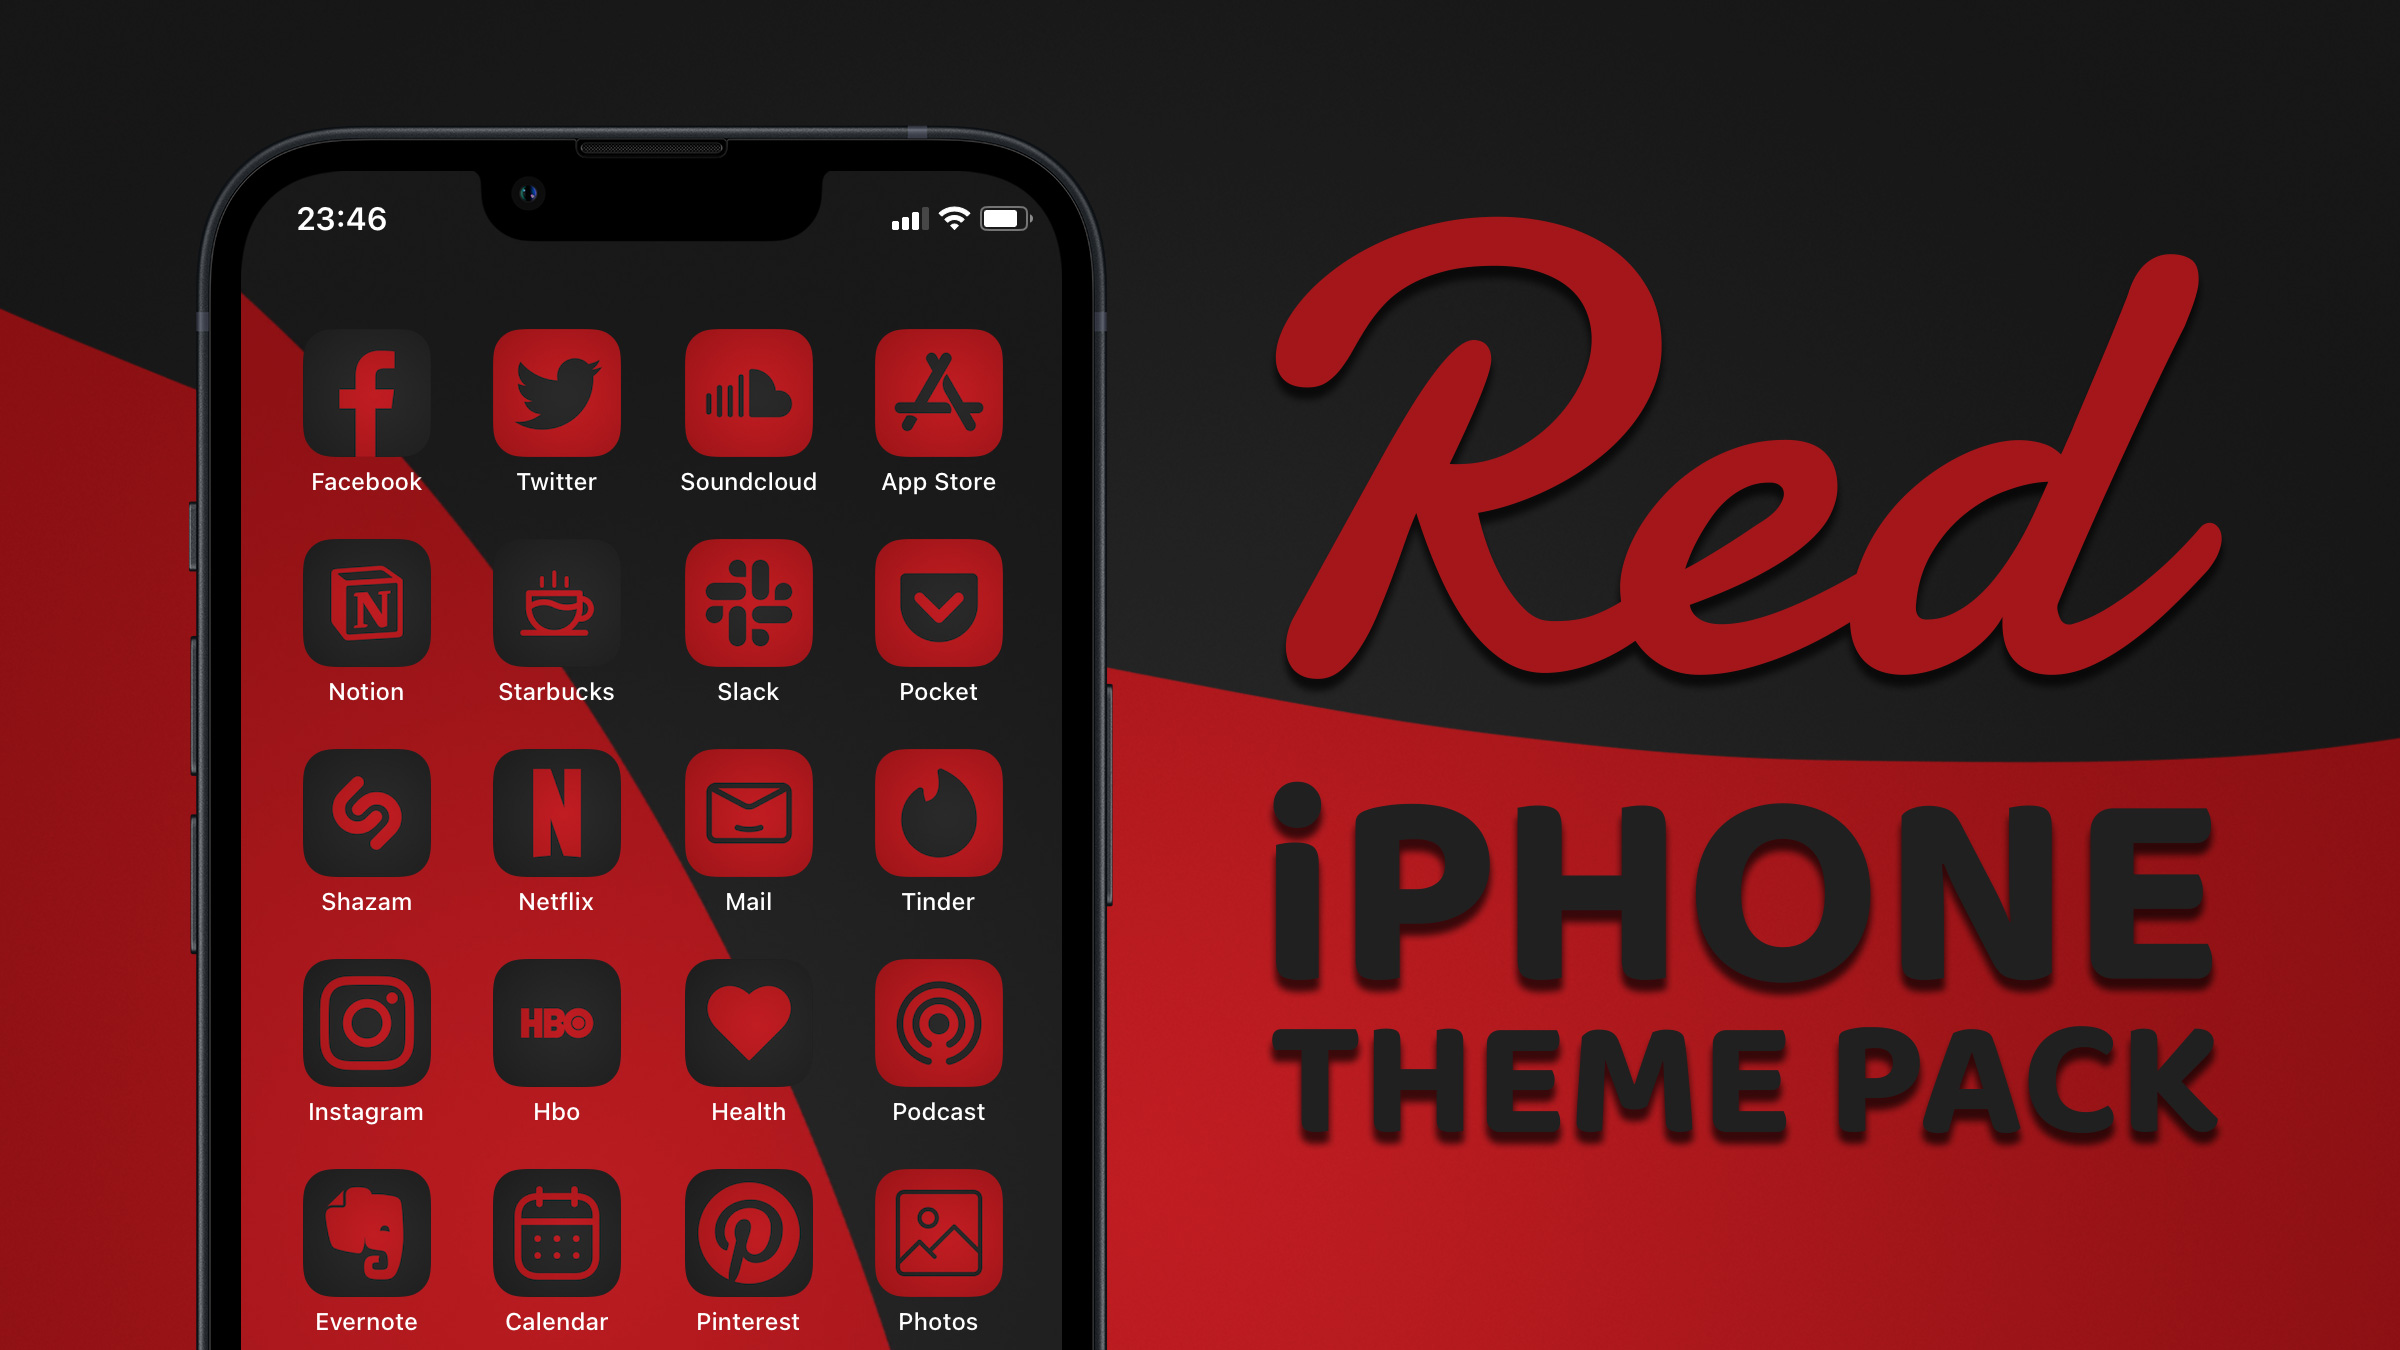 Pinicon on Twitter: "Red and Black App Icons 15 Home Screen Theme Pack Includes; • 400 Aesthetic App Icons • 24 Photo Widgets • 12 Light and Dark Wallpapers